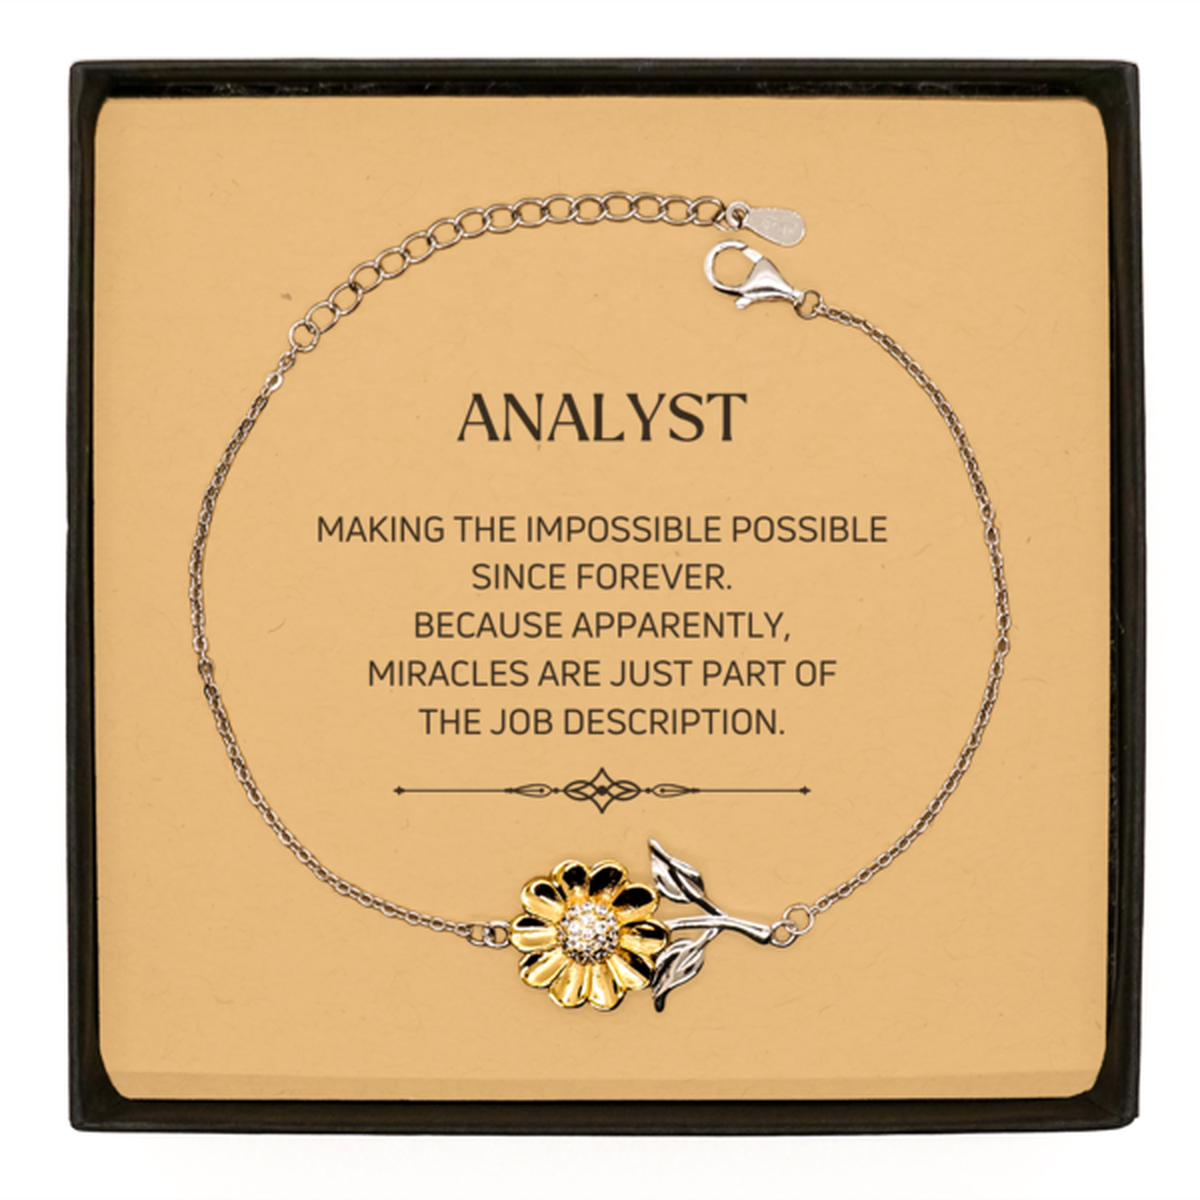 Funny Analyst Gifts, Miracles are just part of the job description, Inspirational Birthday Sunflower Bracelet For Analyst, Men, Women, Coworkers, Friends, Boss